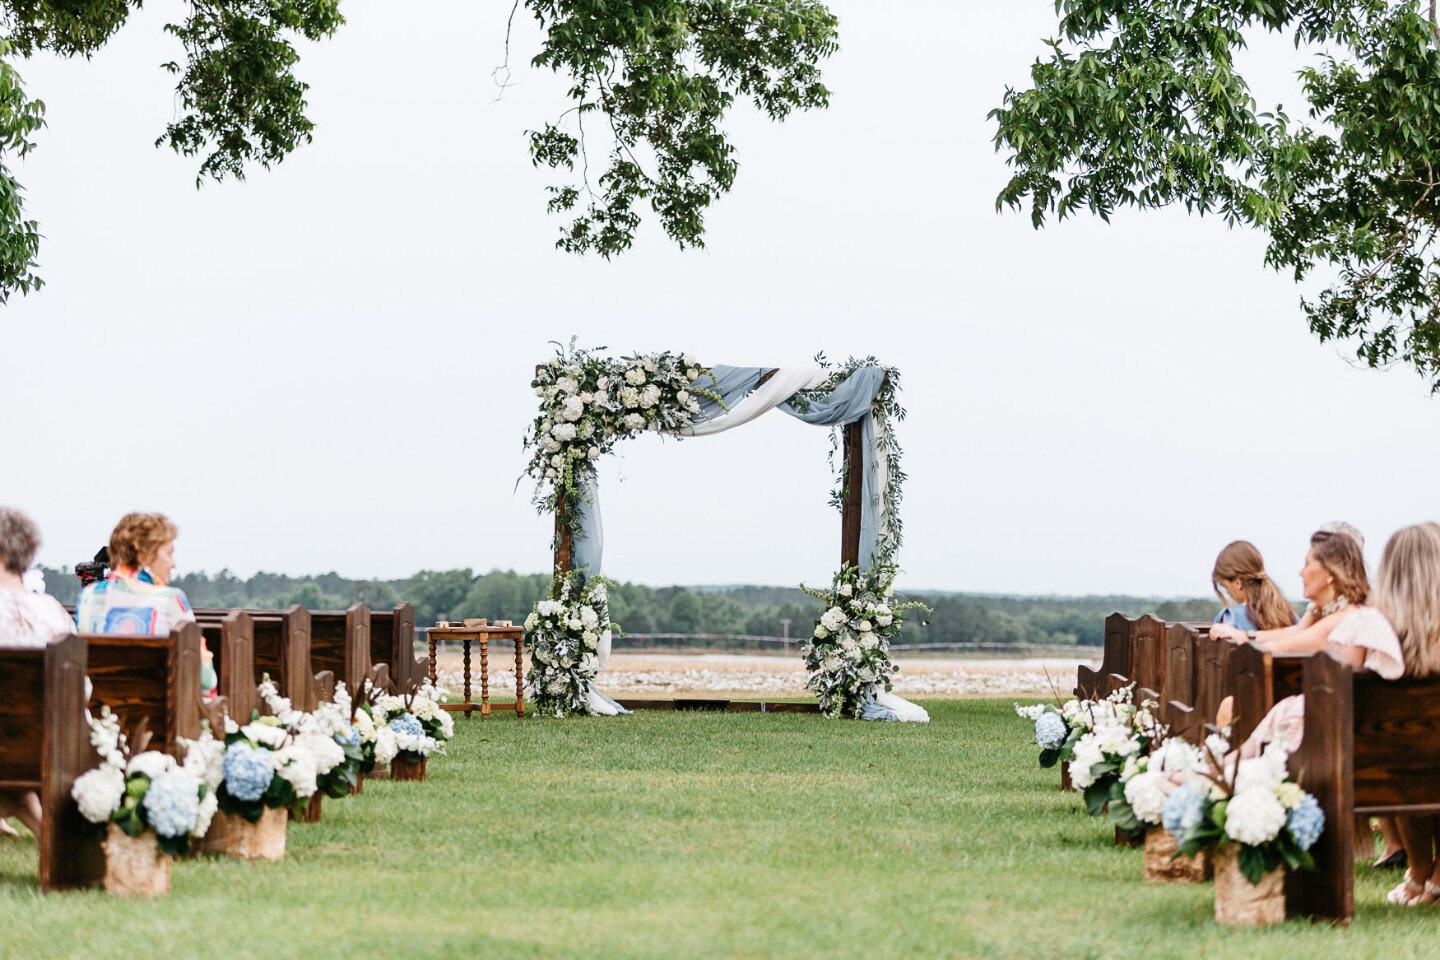 Frame your love with elegance and beauty! 💐✨ We have multiple ceremony arches and arbors that provide the perfect backdrop for saying 'I do' in style. Our expert team can design your dream ceremony together!
Photo Cred: Mark Williams Photography #Ce